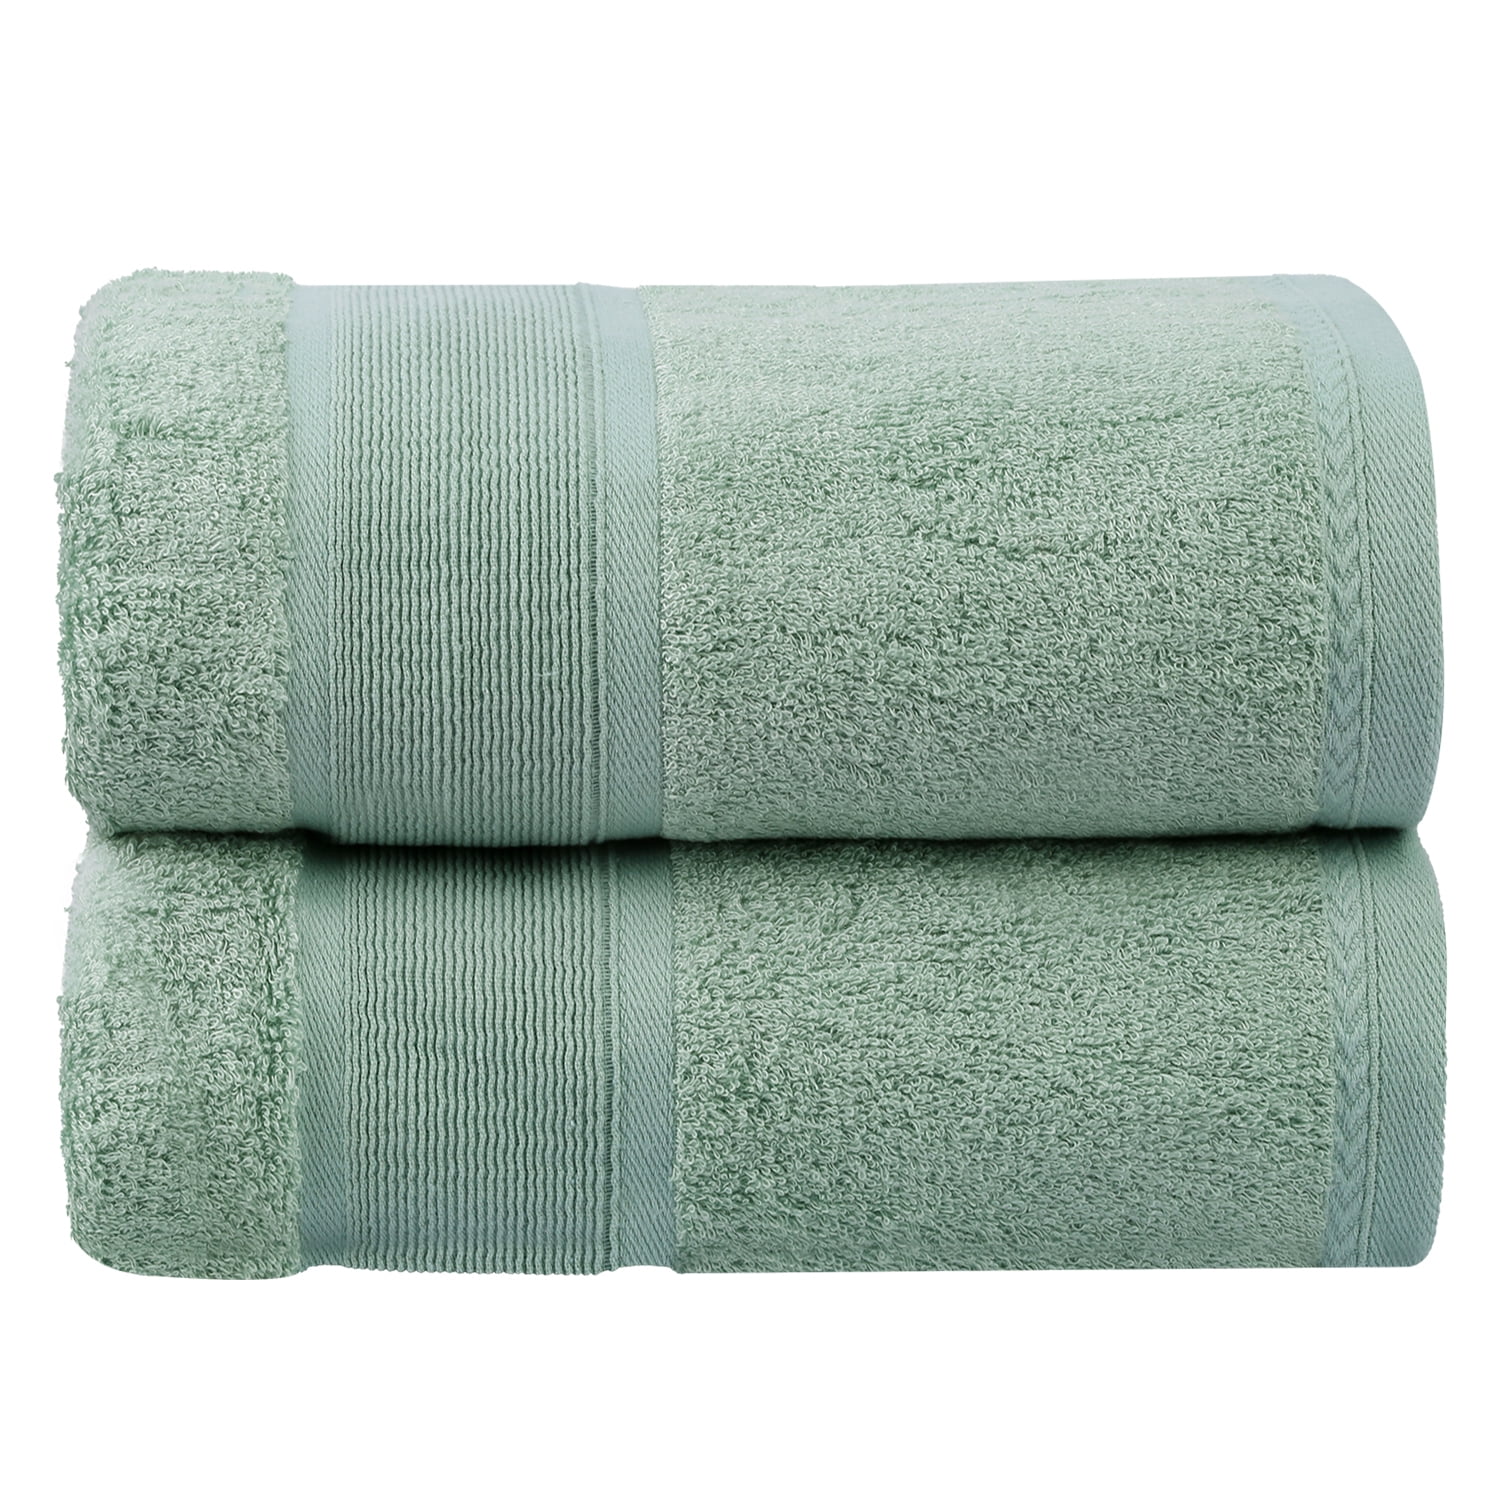 CrystalTowels 7-Pack Bath Towels - Extra-Absorbent - 100% Cotton - 27 x 52